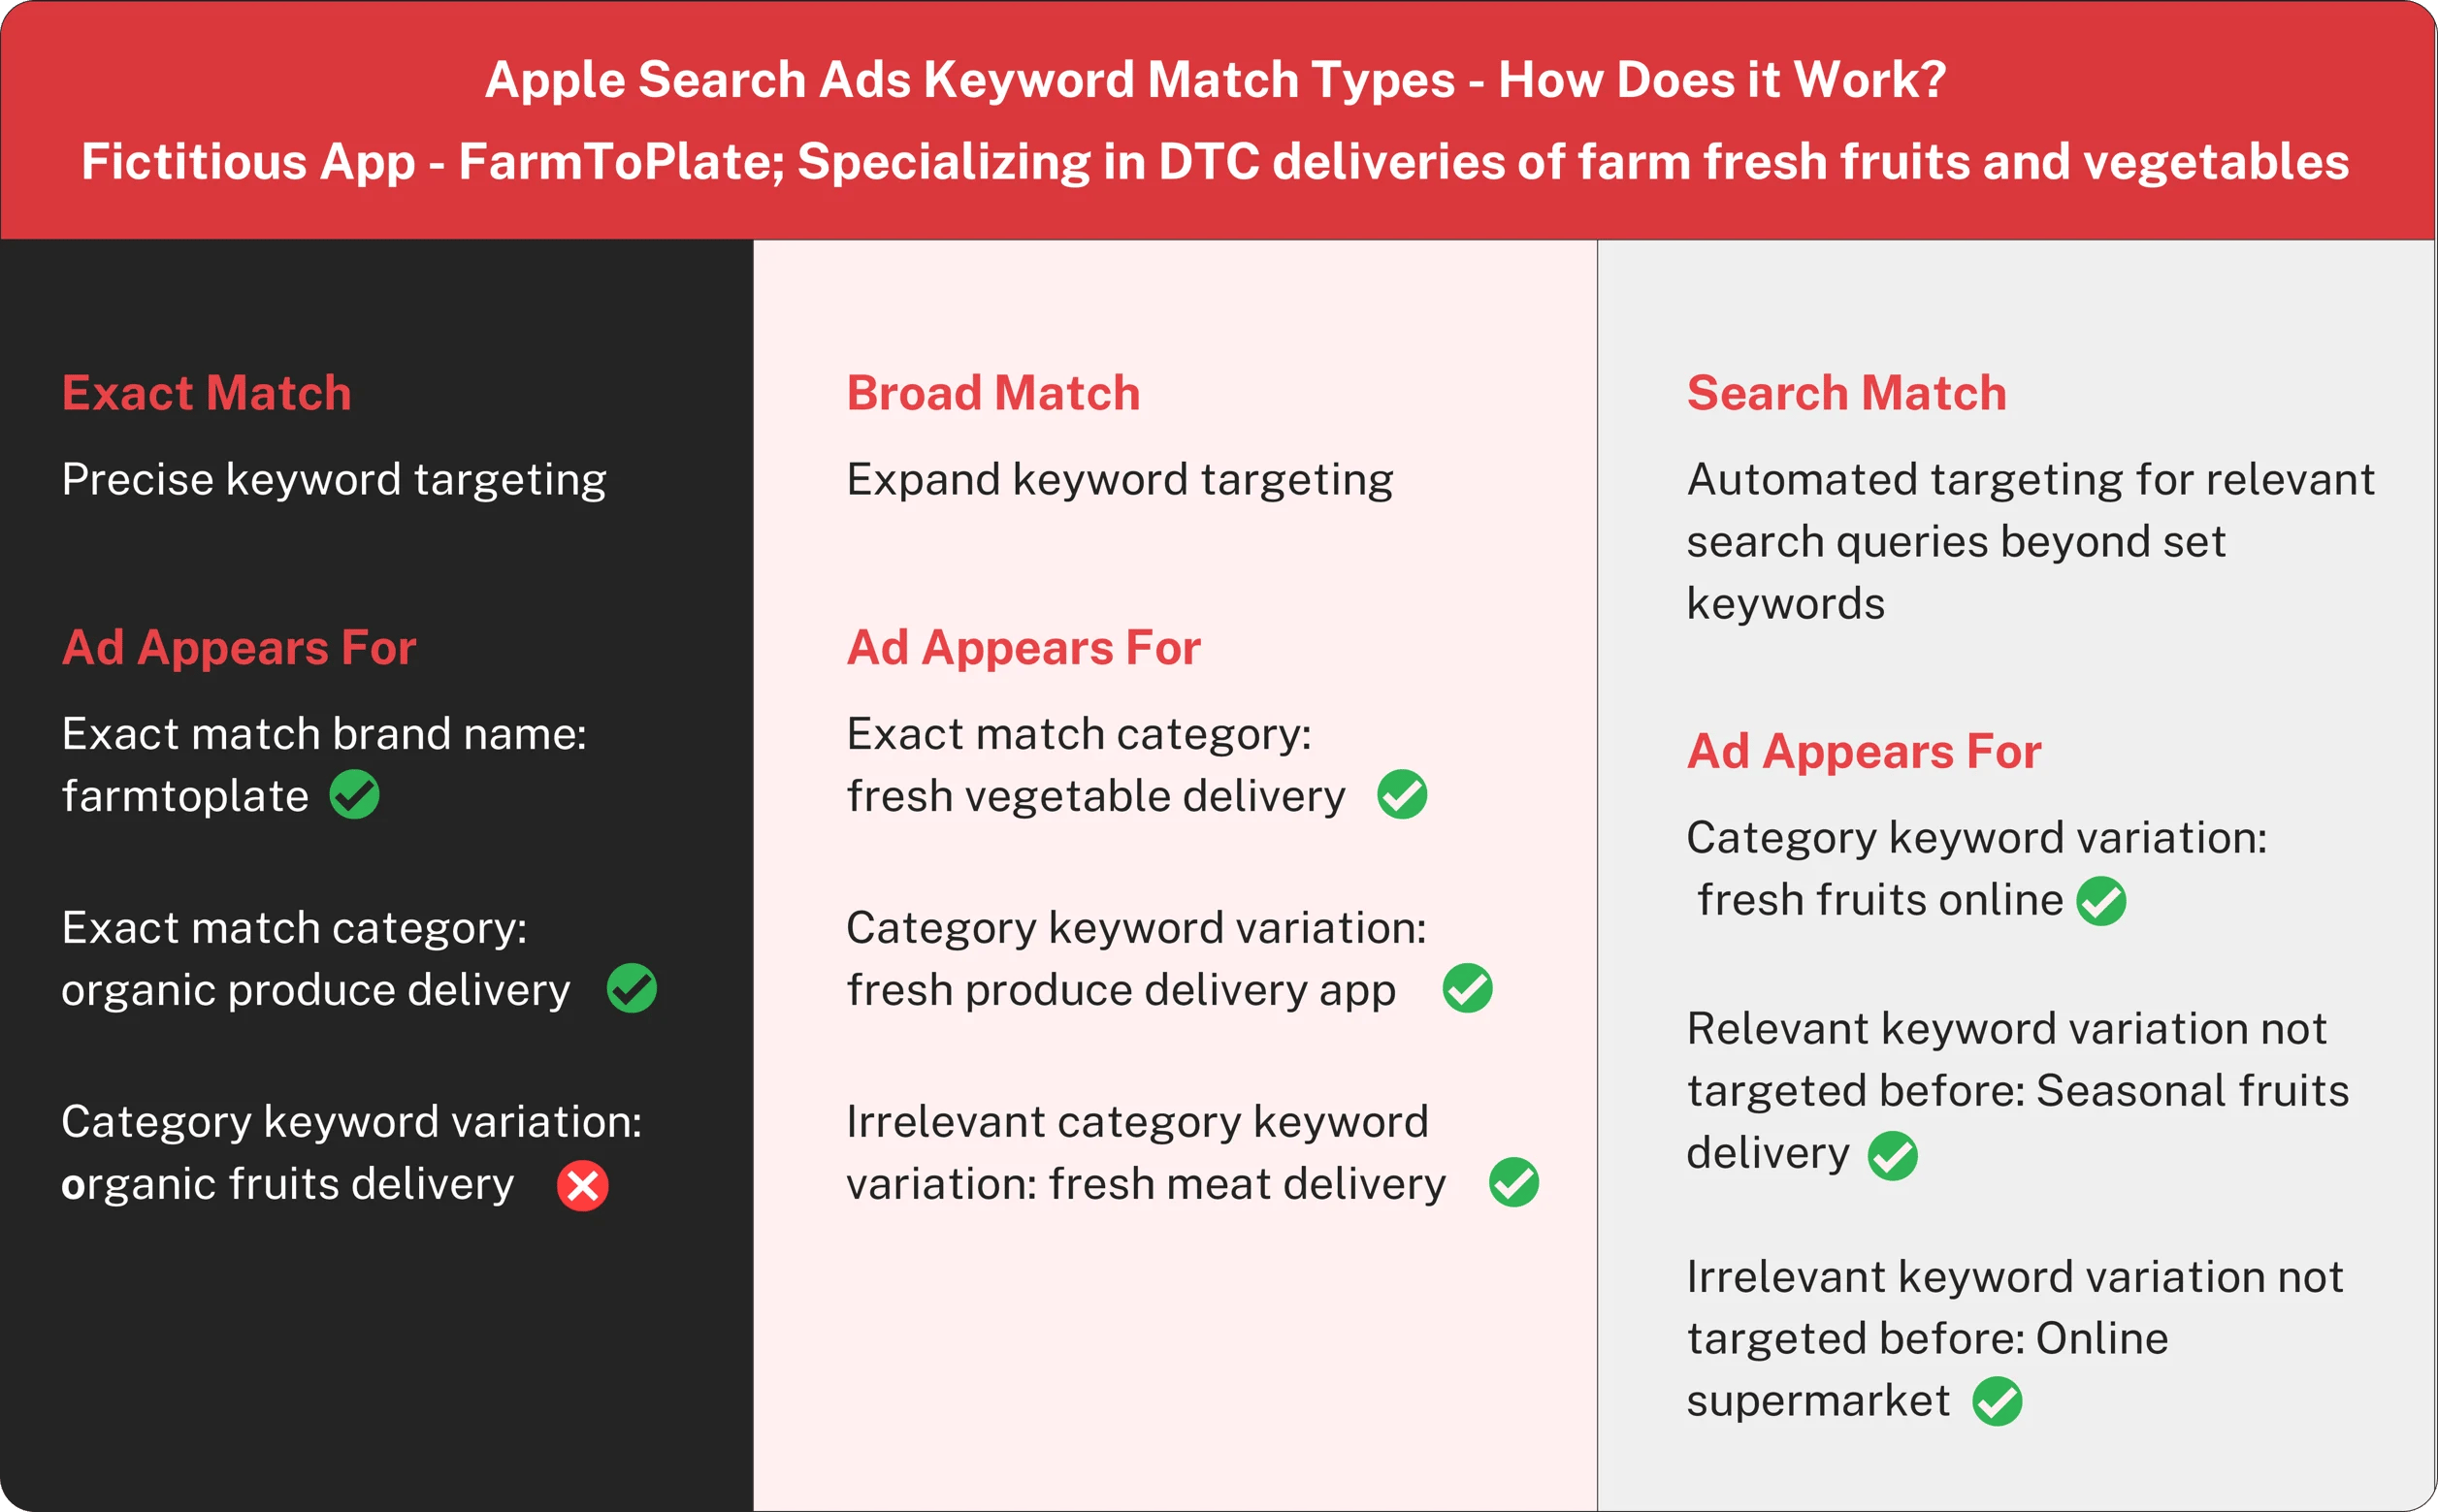 apple-search-ads-keywords-match-types-summary